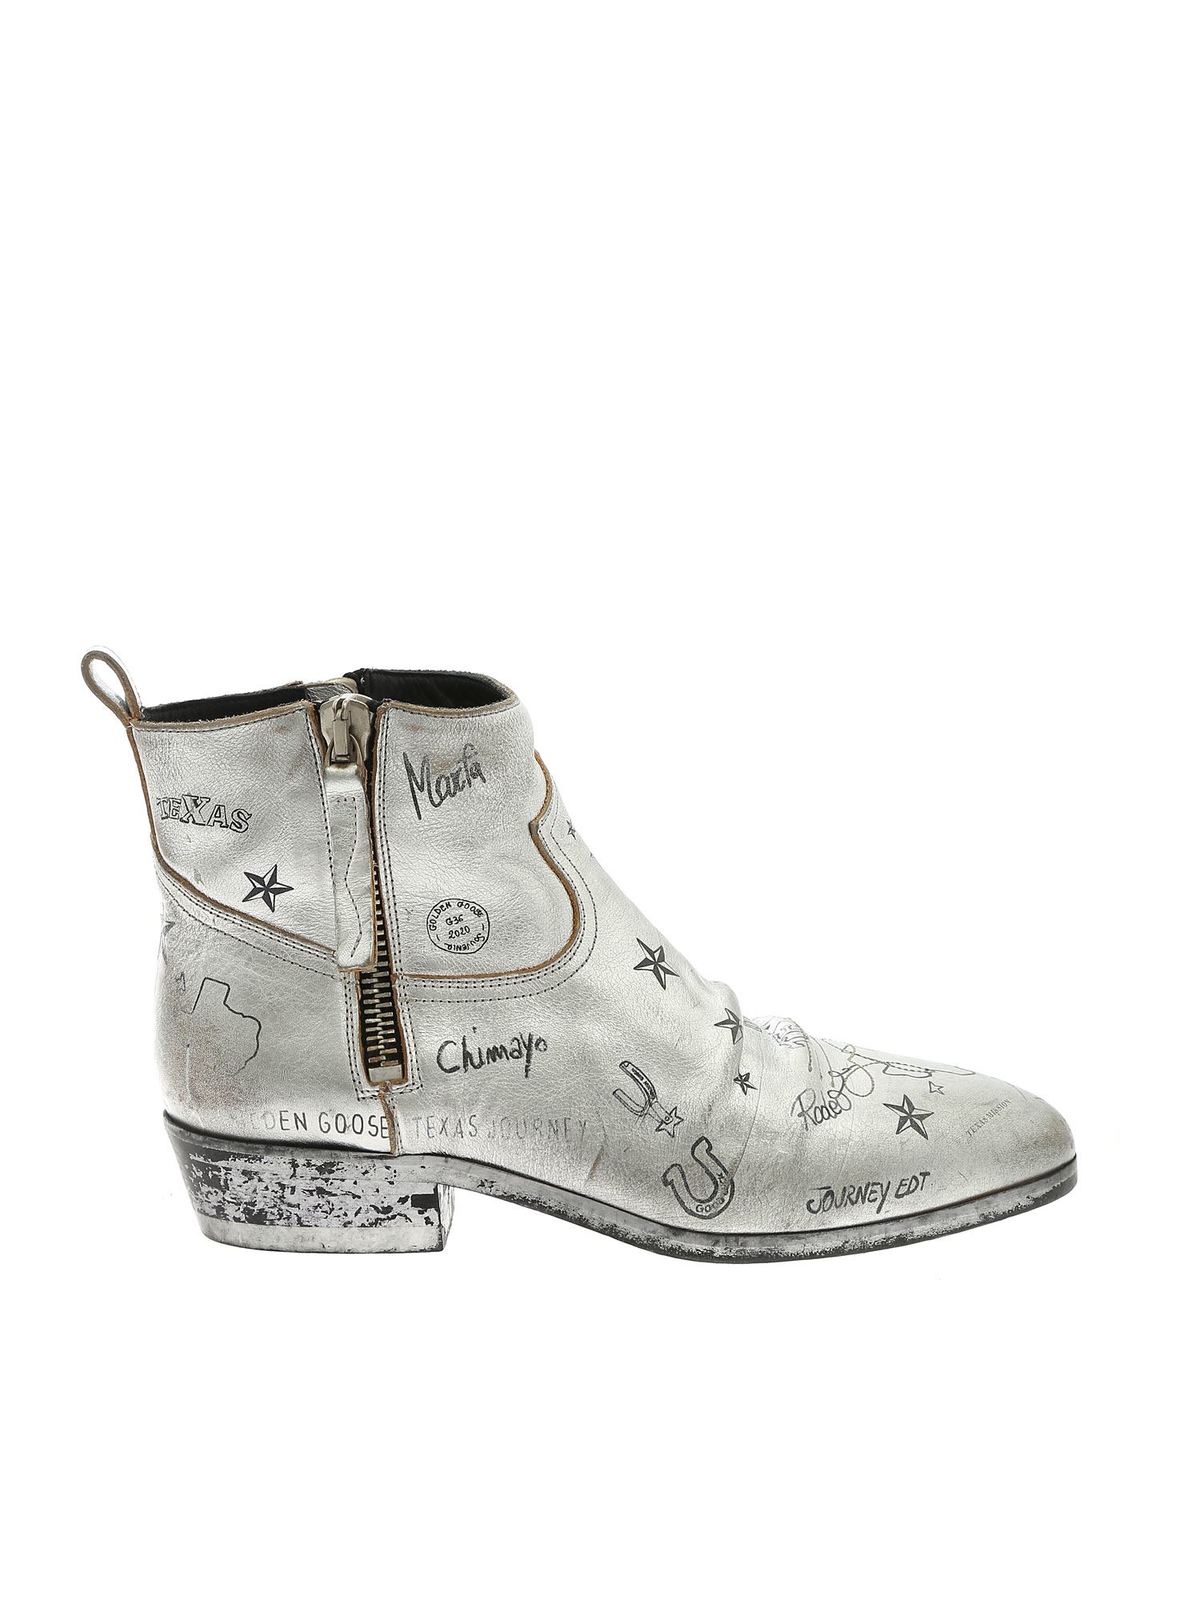 GOLDEN GOOSE VIAND ANKLE BOOTS IN SILVER COLOR